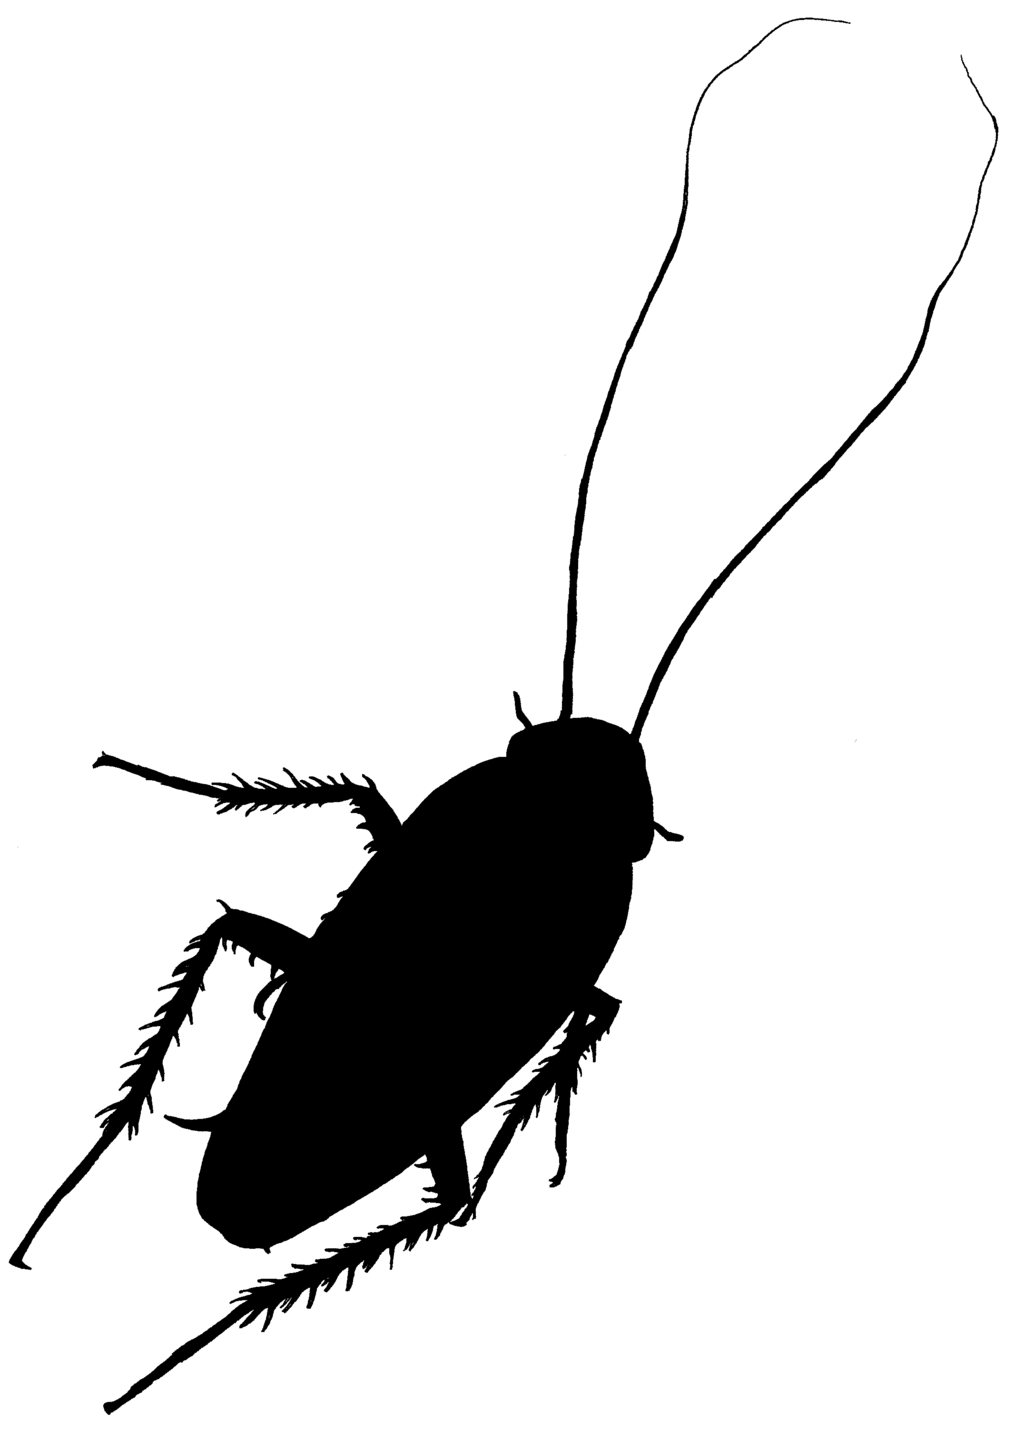 Cockroach Silhouette by Zucco1 on Clipart library